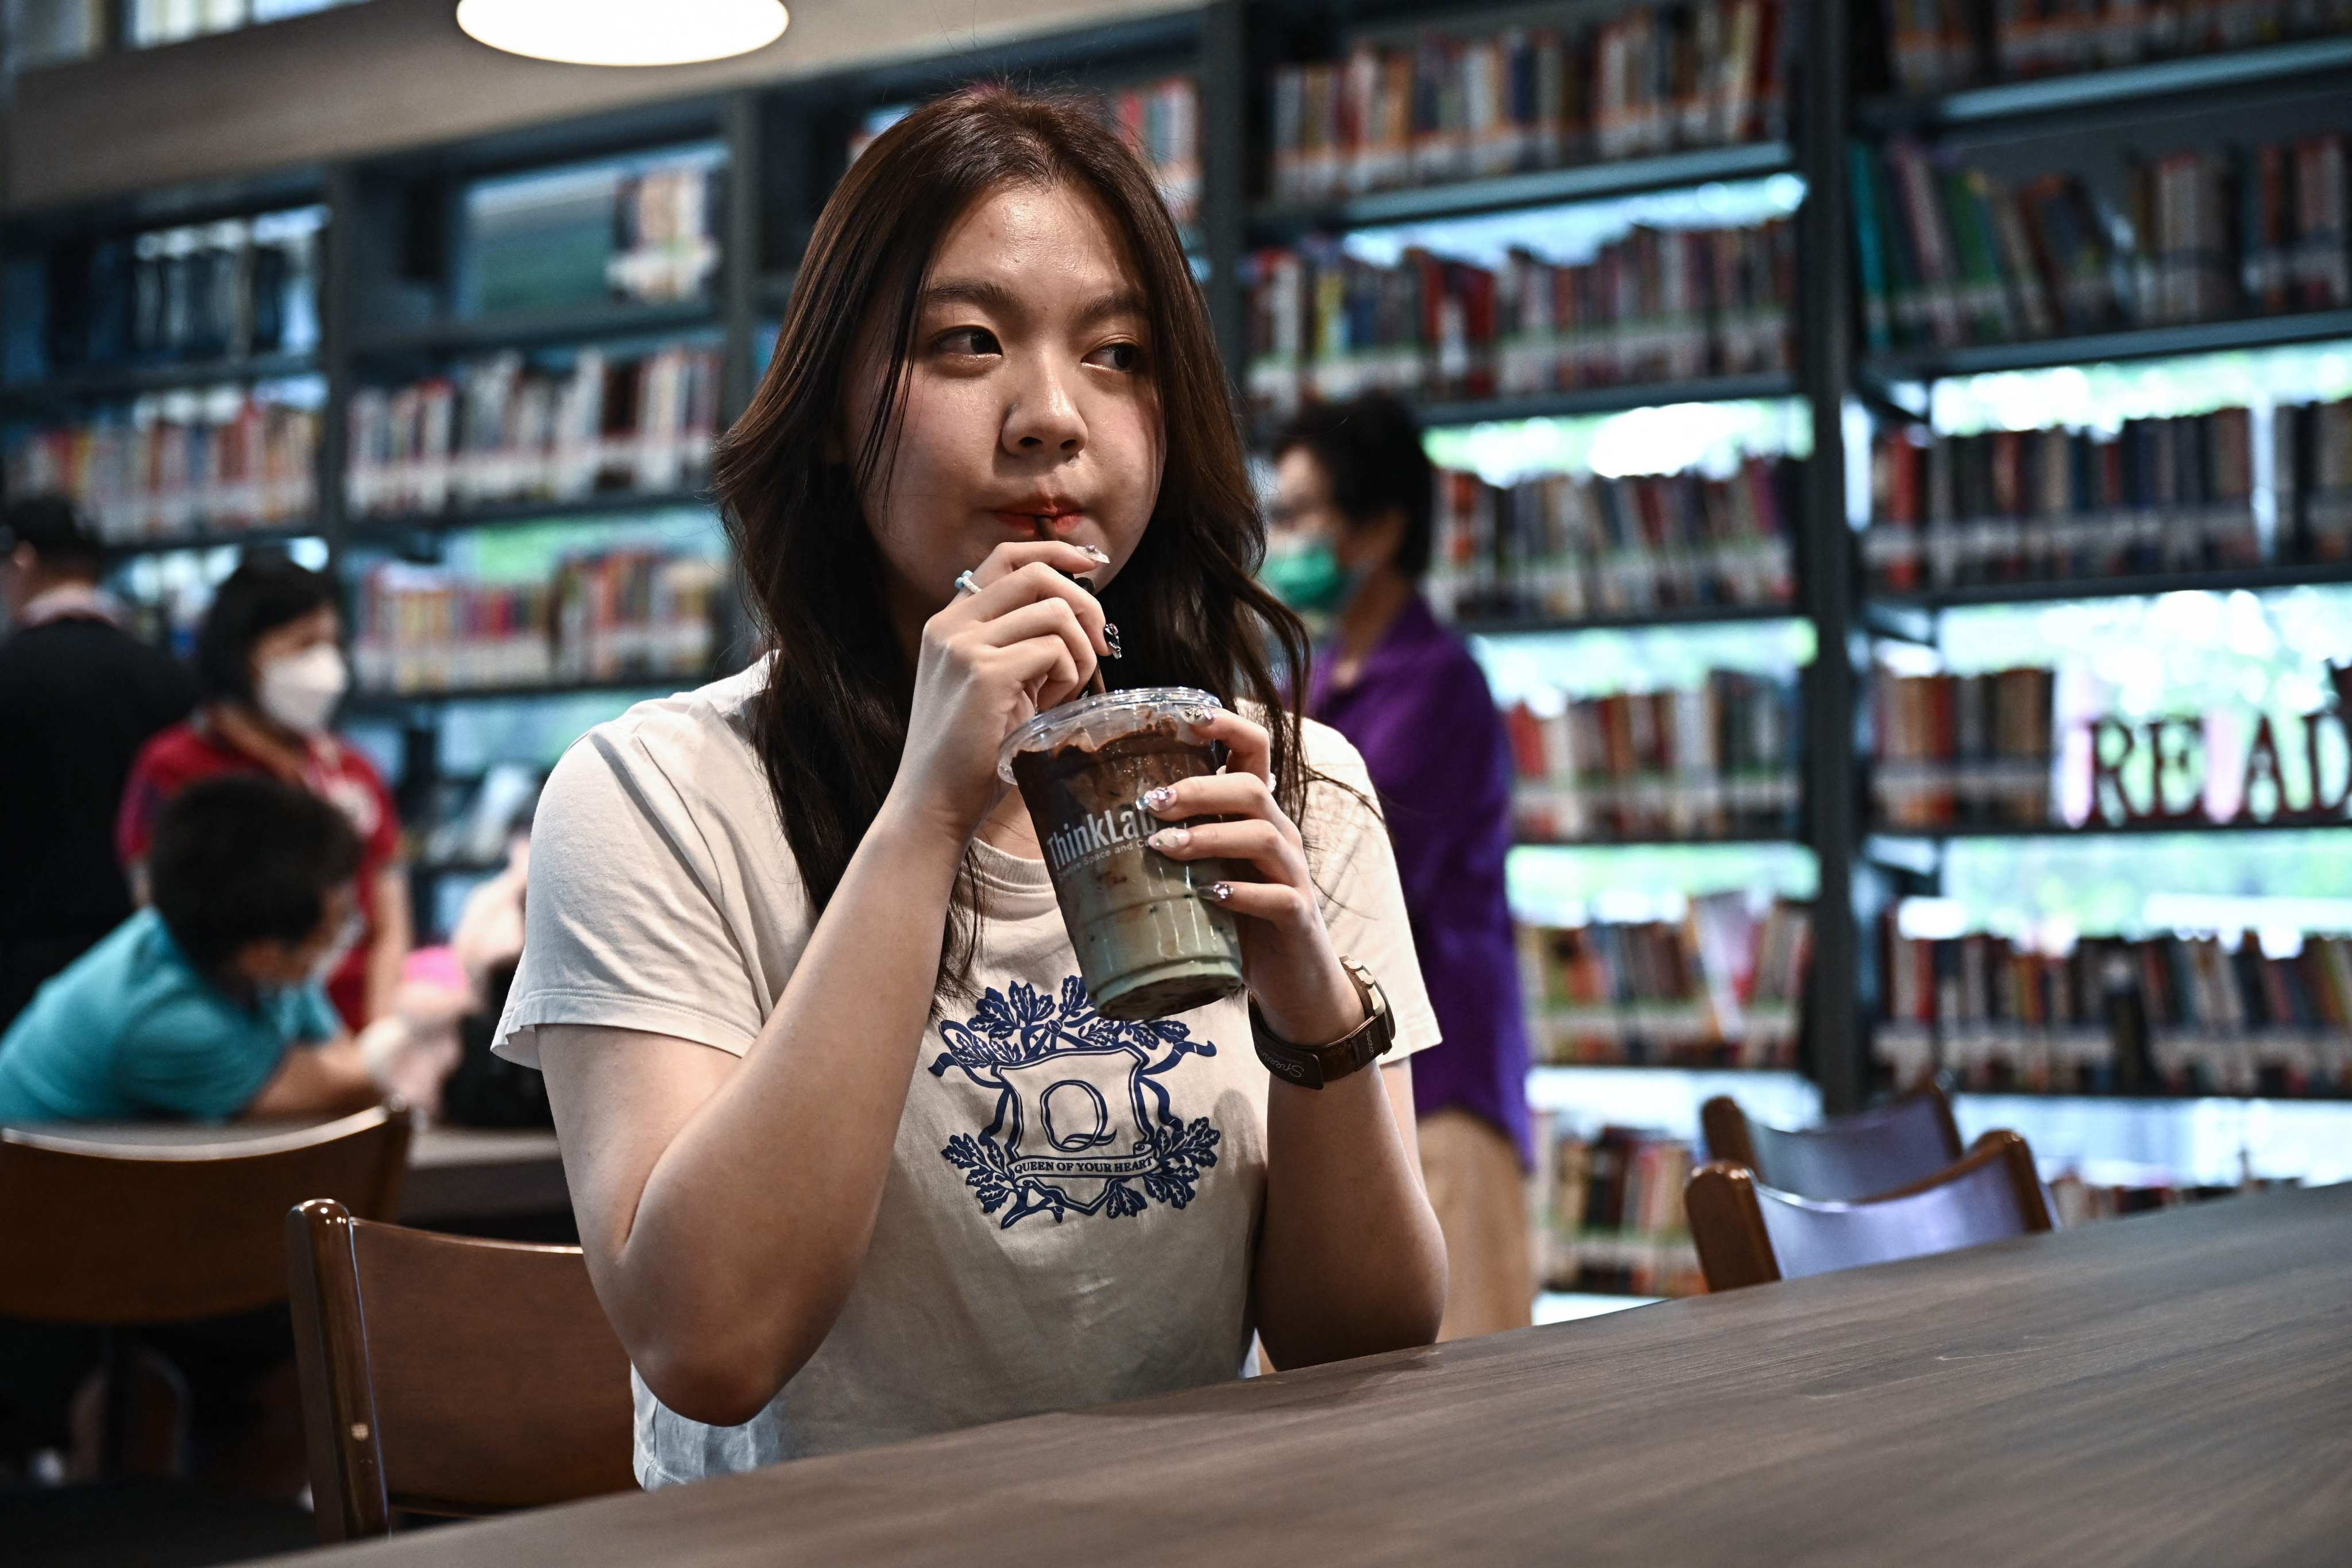 A customer drinking an iced chocolate-mint drink at the ThinkLab cafe in Pheu Thai party’s Bangkok headquarters. Photo: AFP